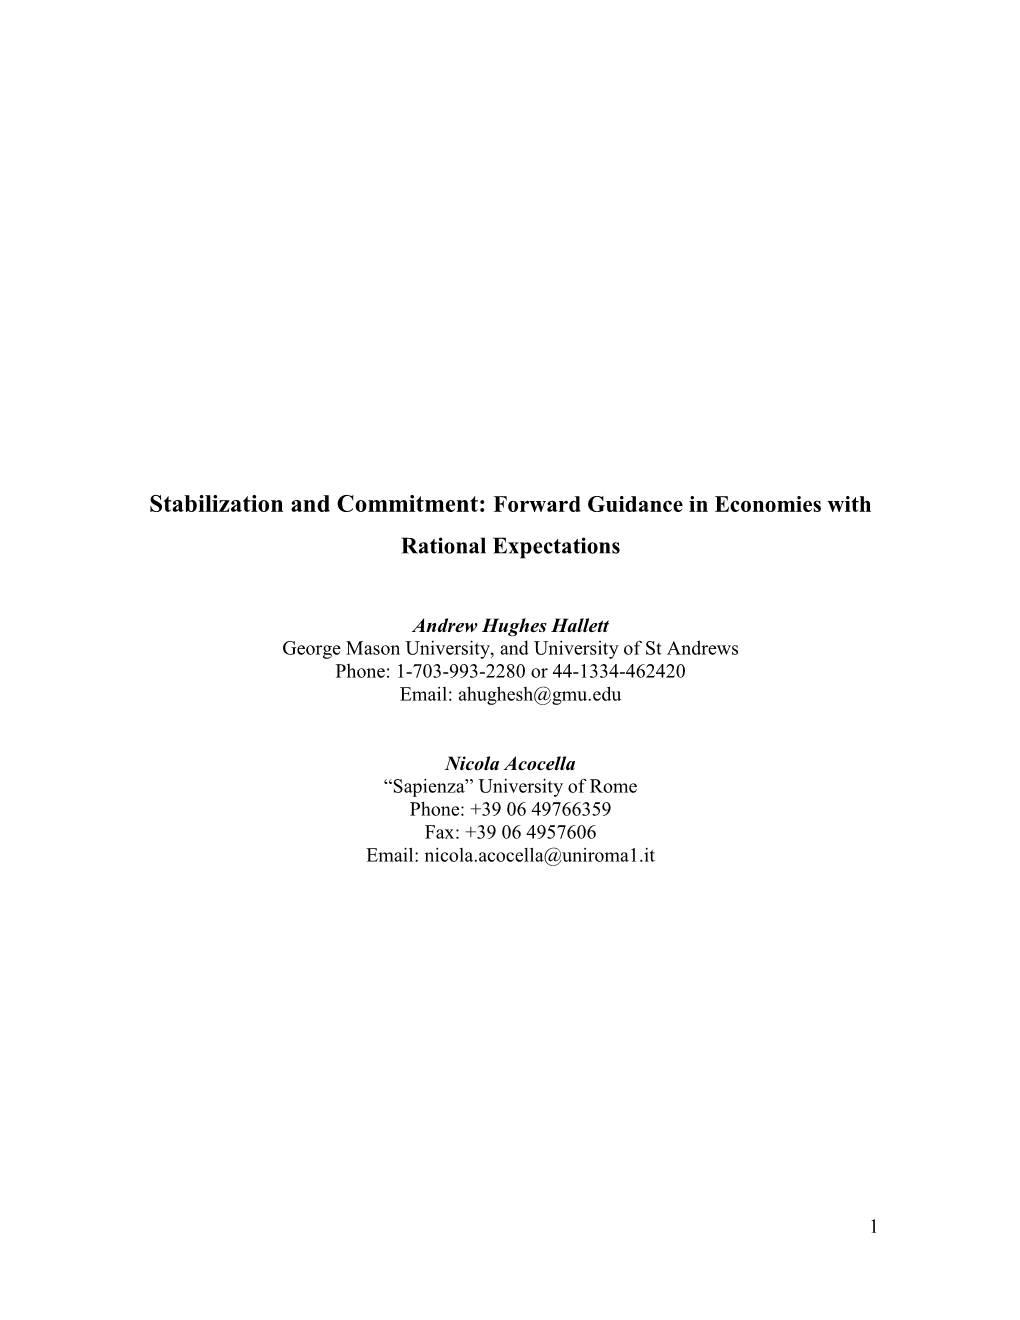 Stabilization and Commitment: Forward Guidance in Economies with Rational Expectations